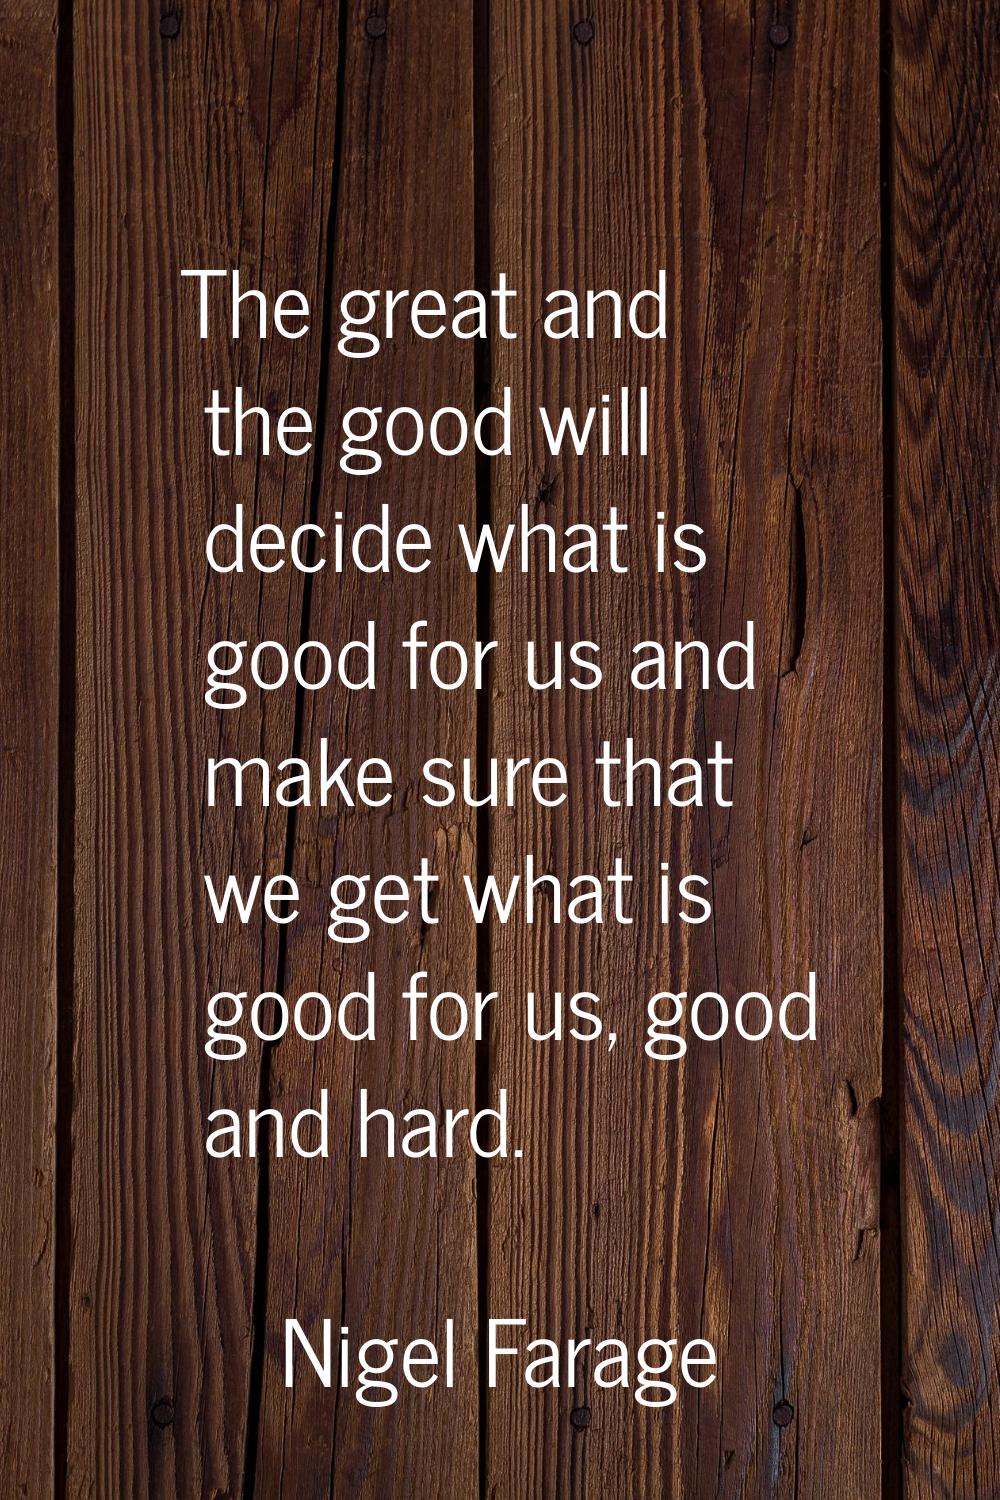 The great and the good will decide what is good for us and make sure that we get what is good for u